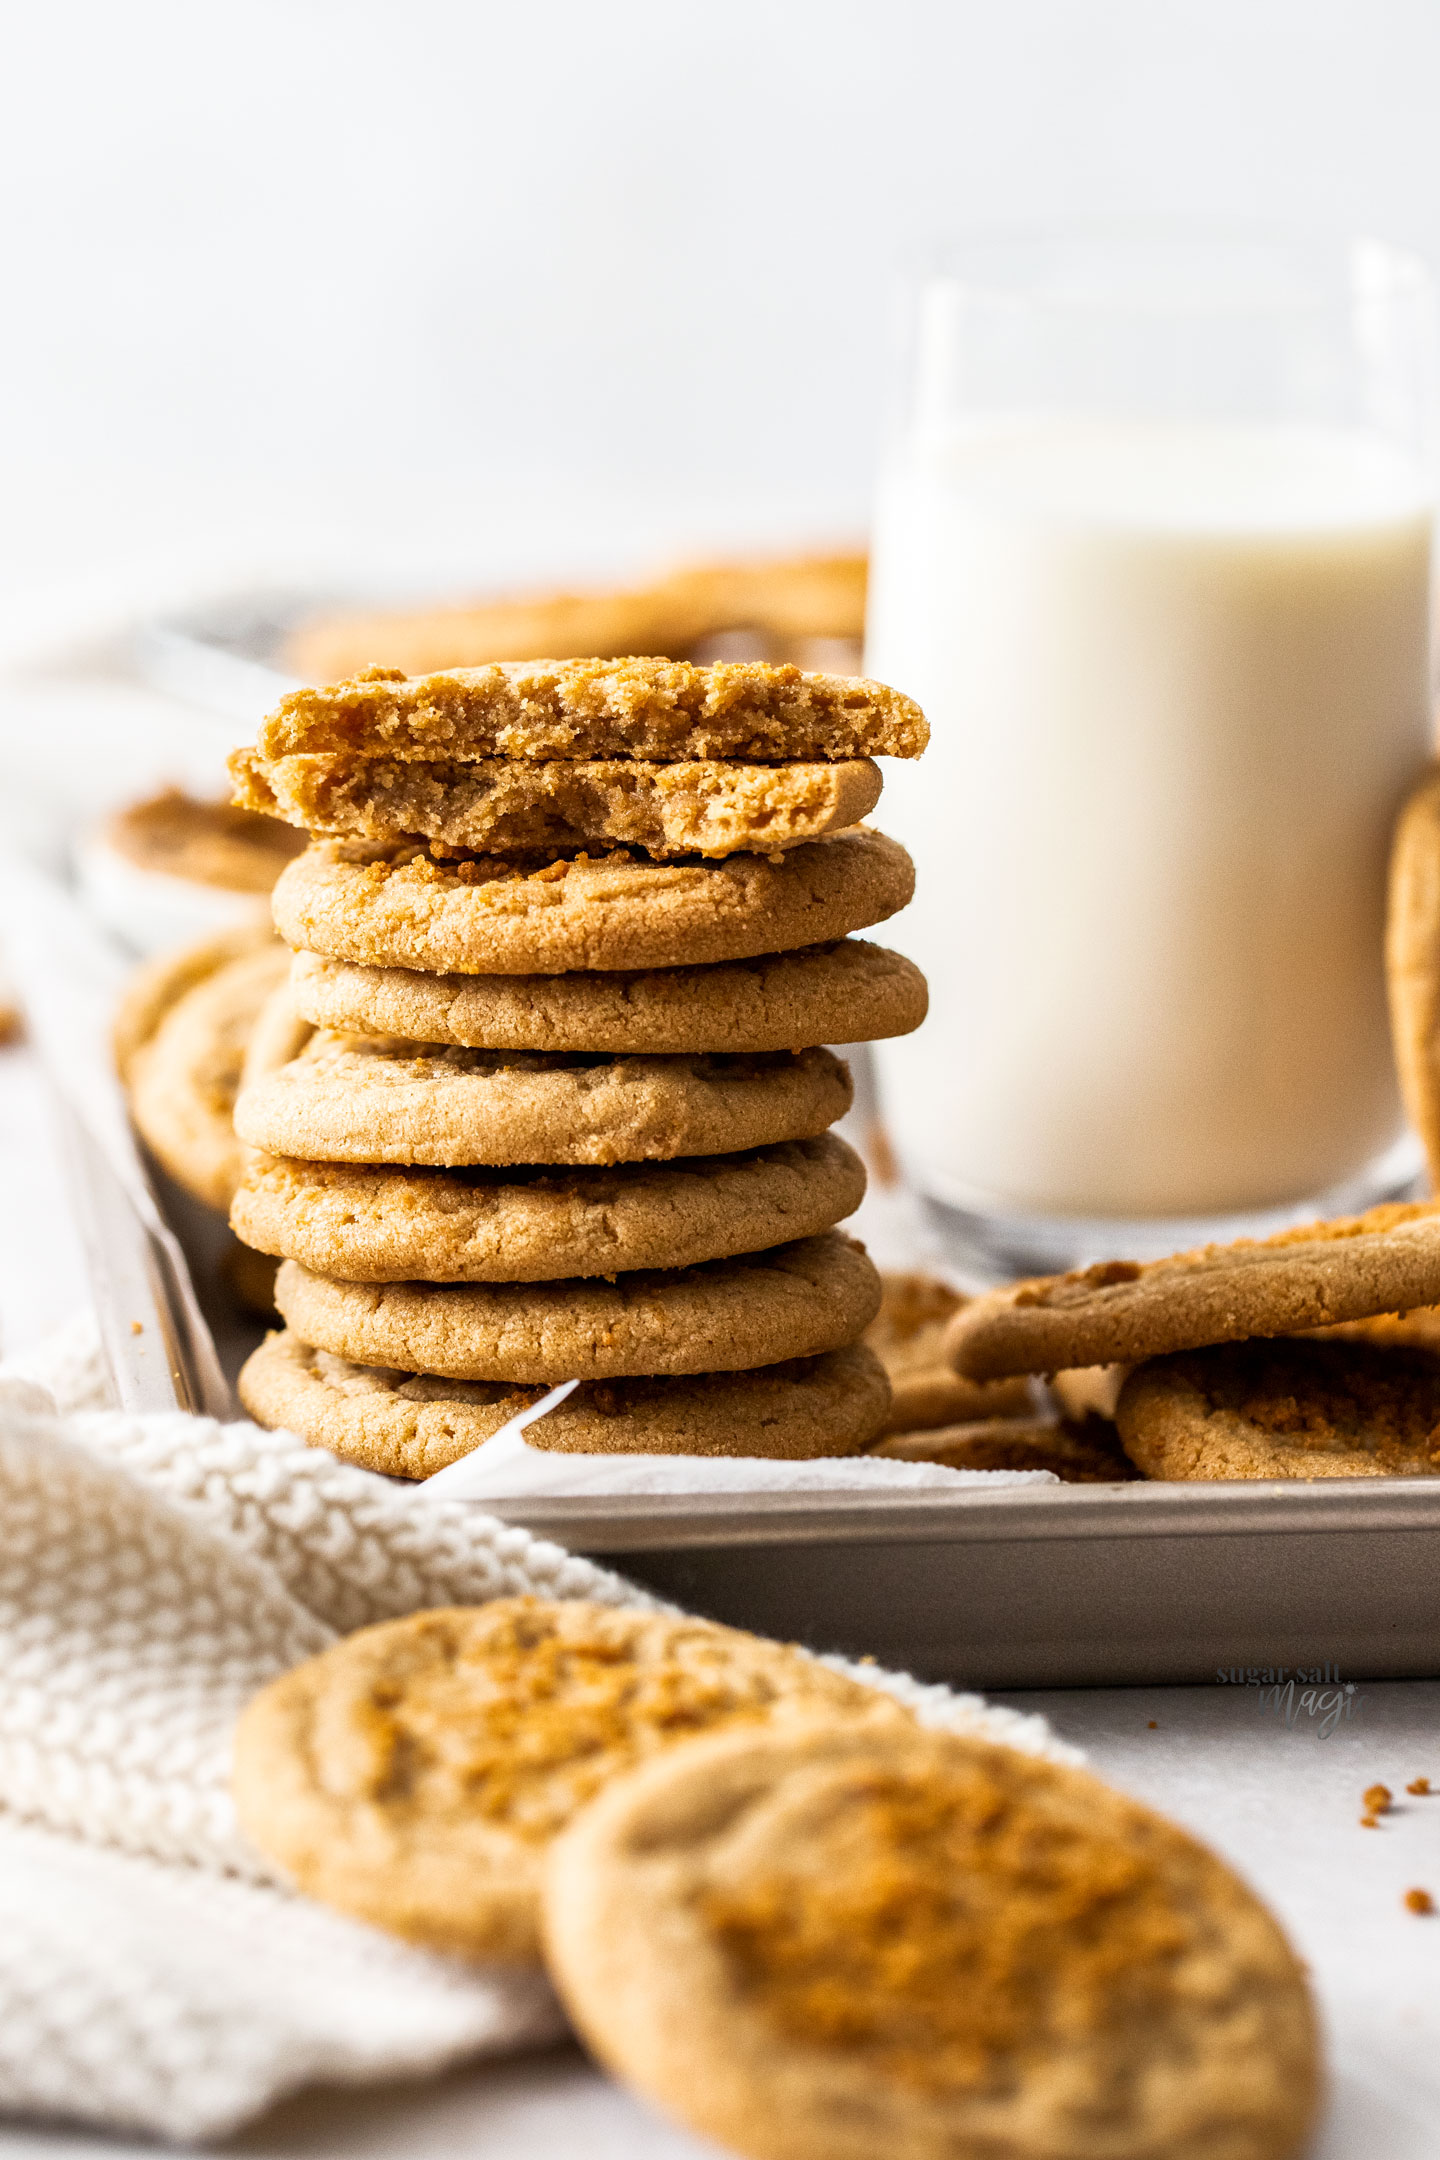 A stack of Biscoff butter cookies next to a glass of milk.